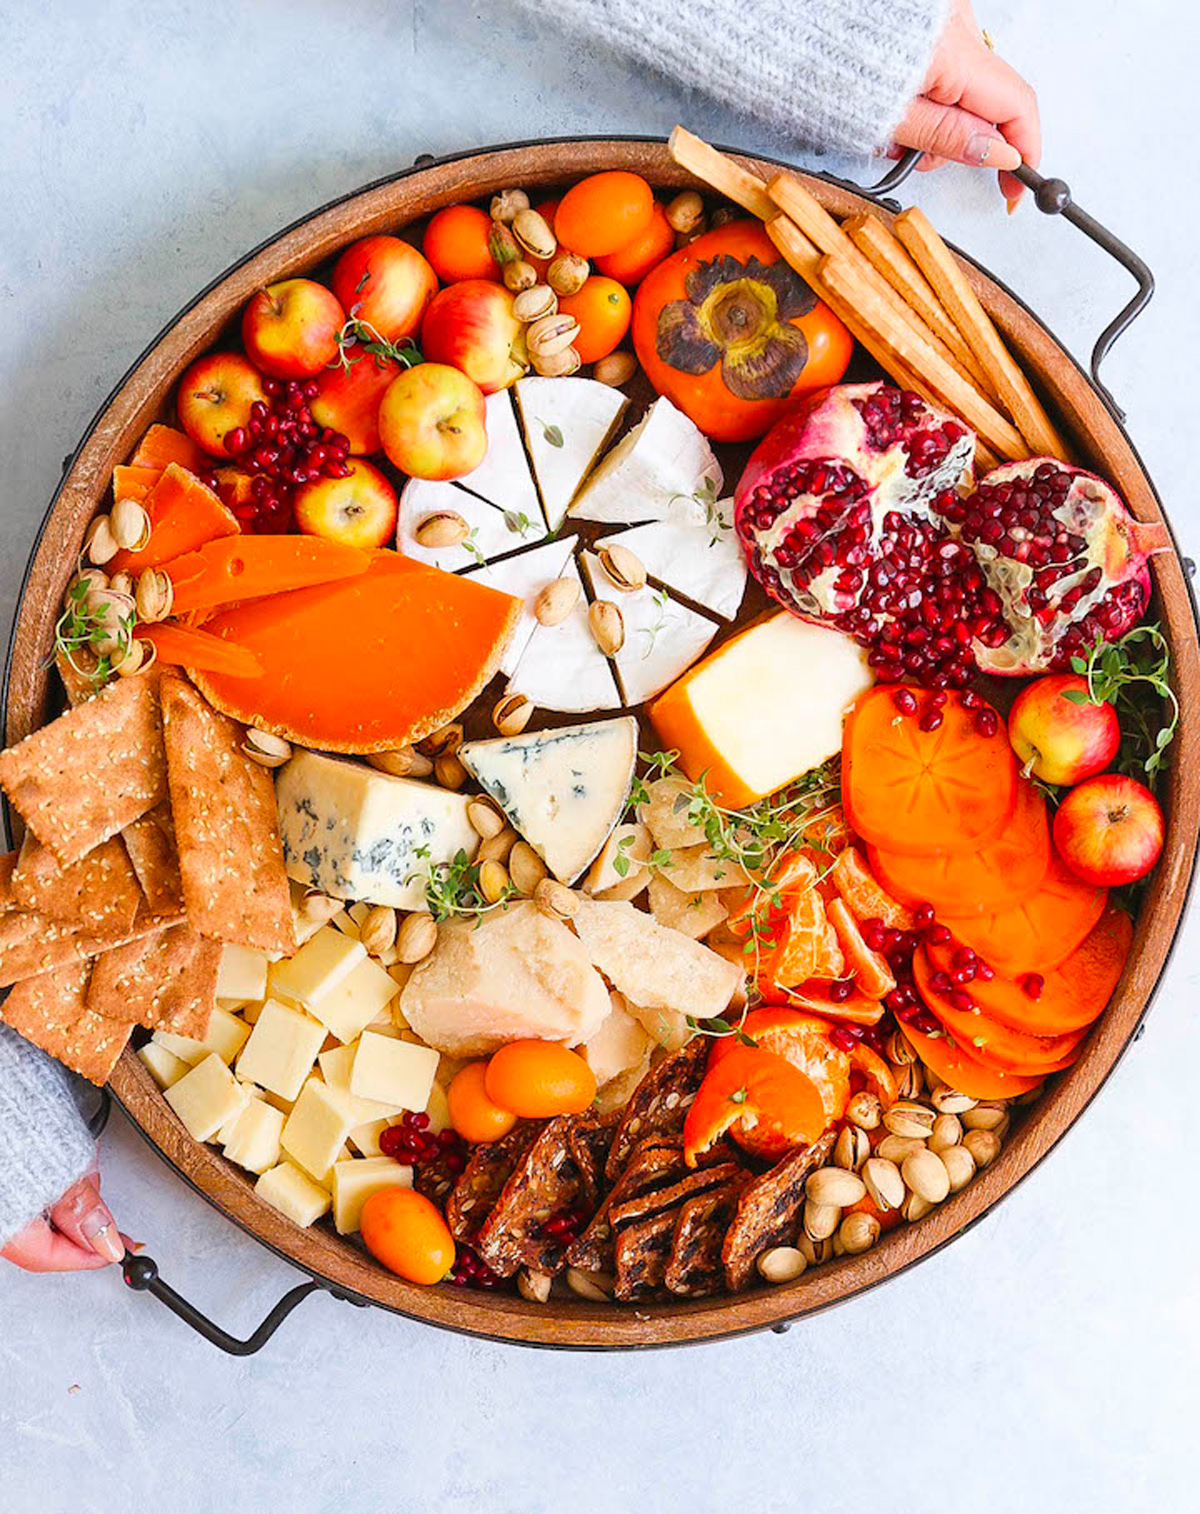 Damn Delicious's cheese board is complete with pomegranates, cheese, nuts, seasonal fruit, and crackers.